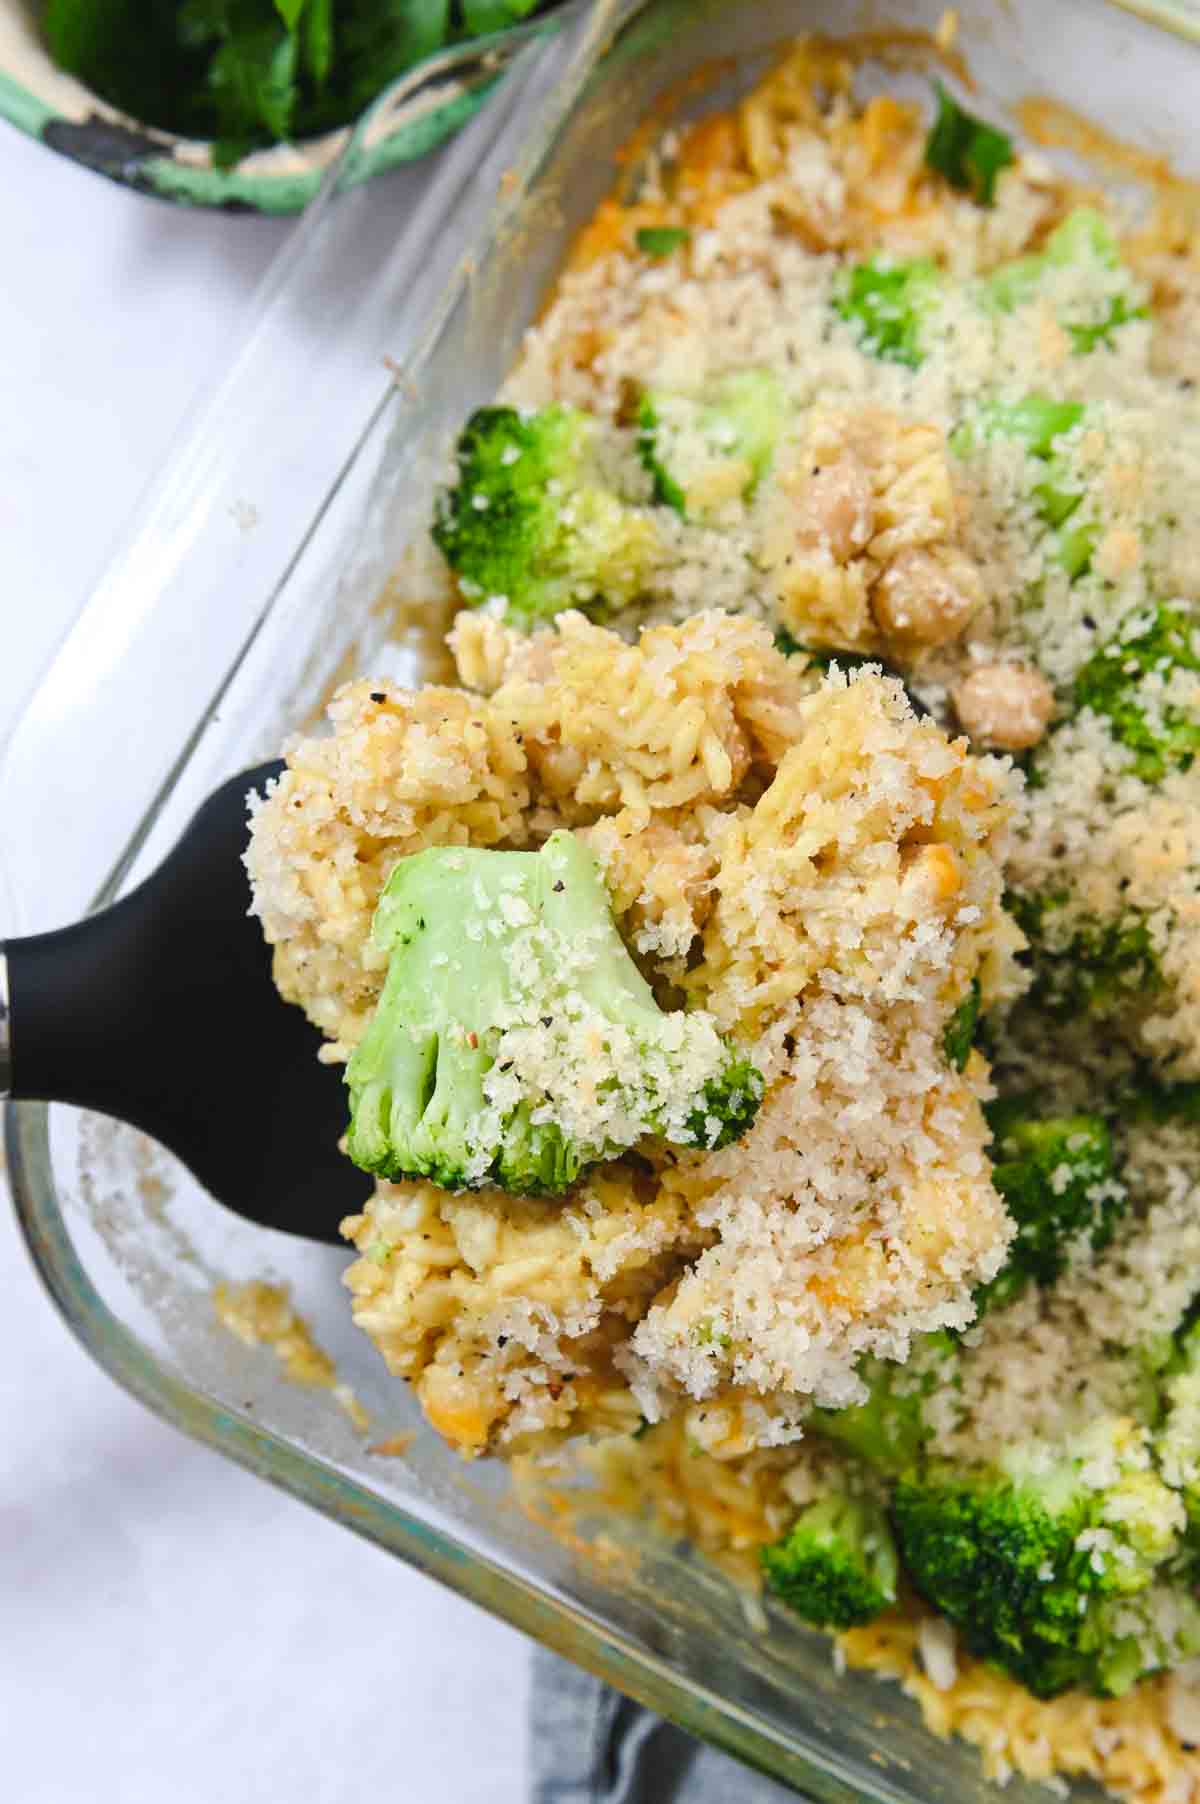 Spatula lifting a square of broccoli rice casserole out of a baking dish.